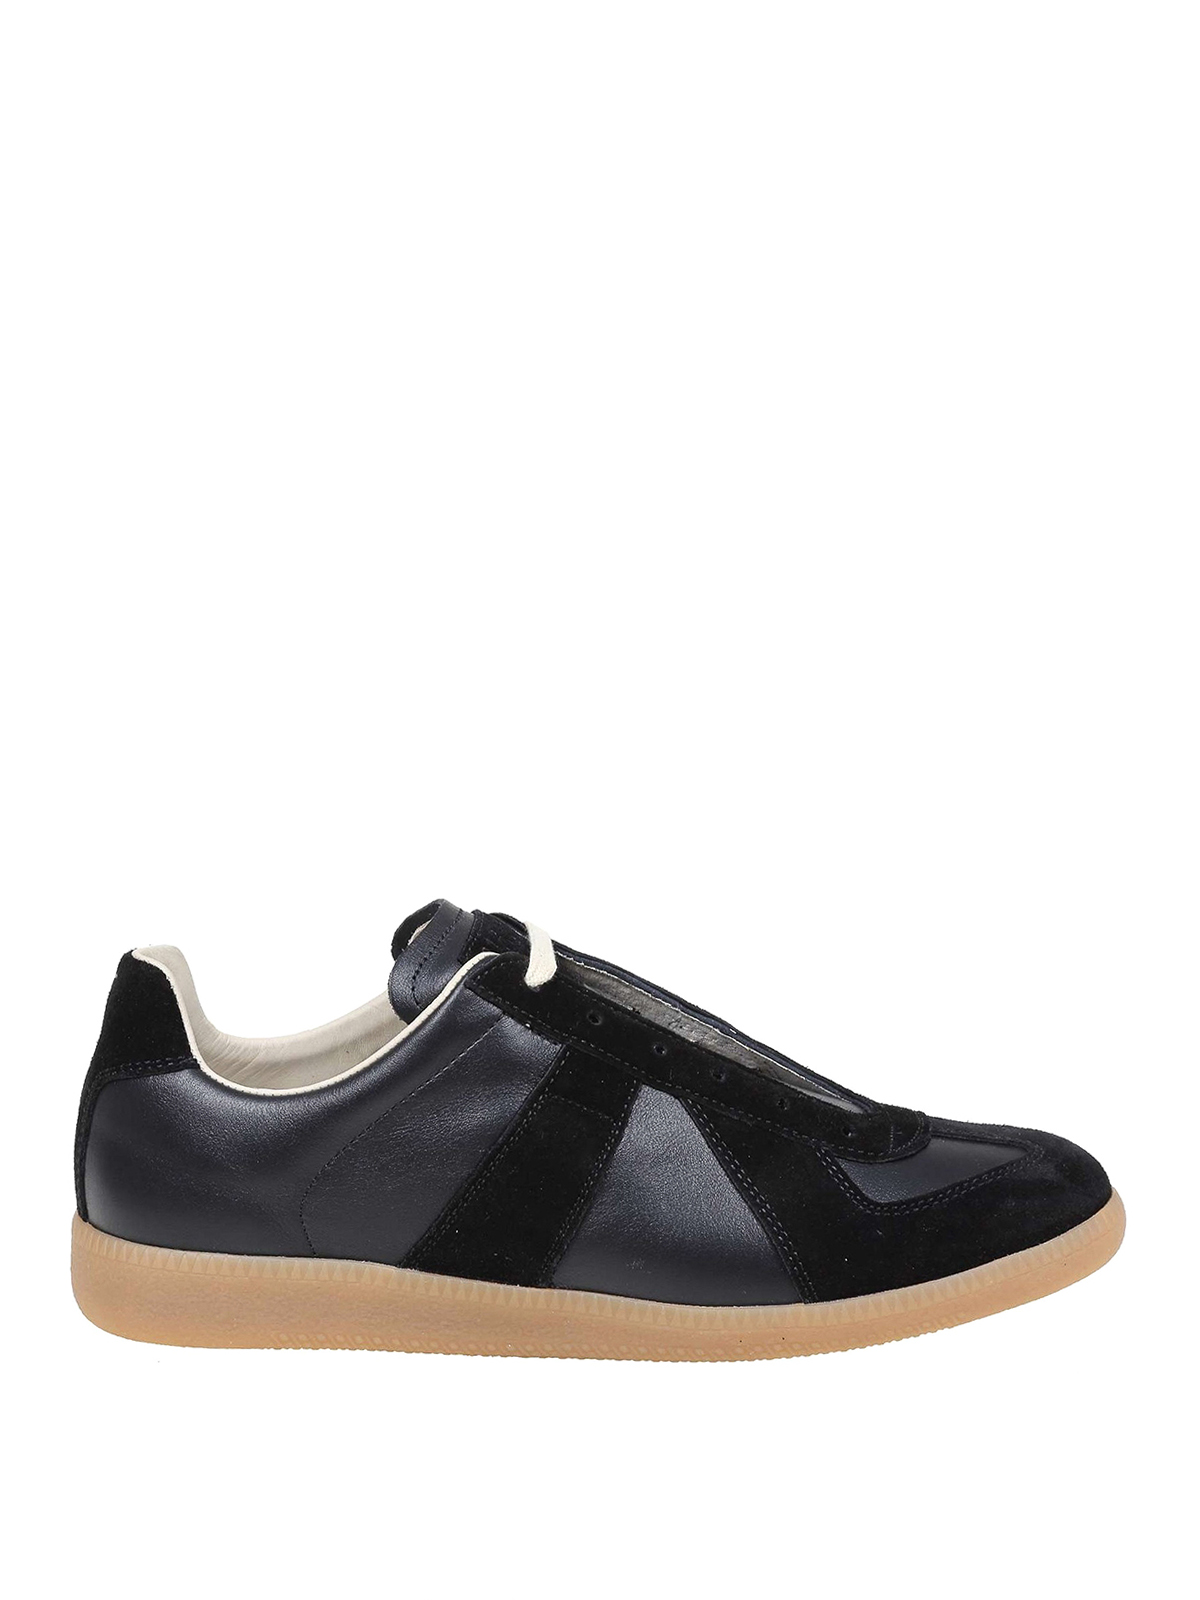 Maison Margiela Suede And Leather Sneakers In Negro